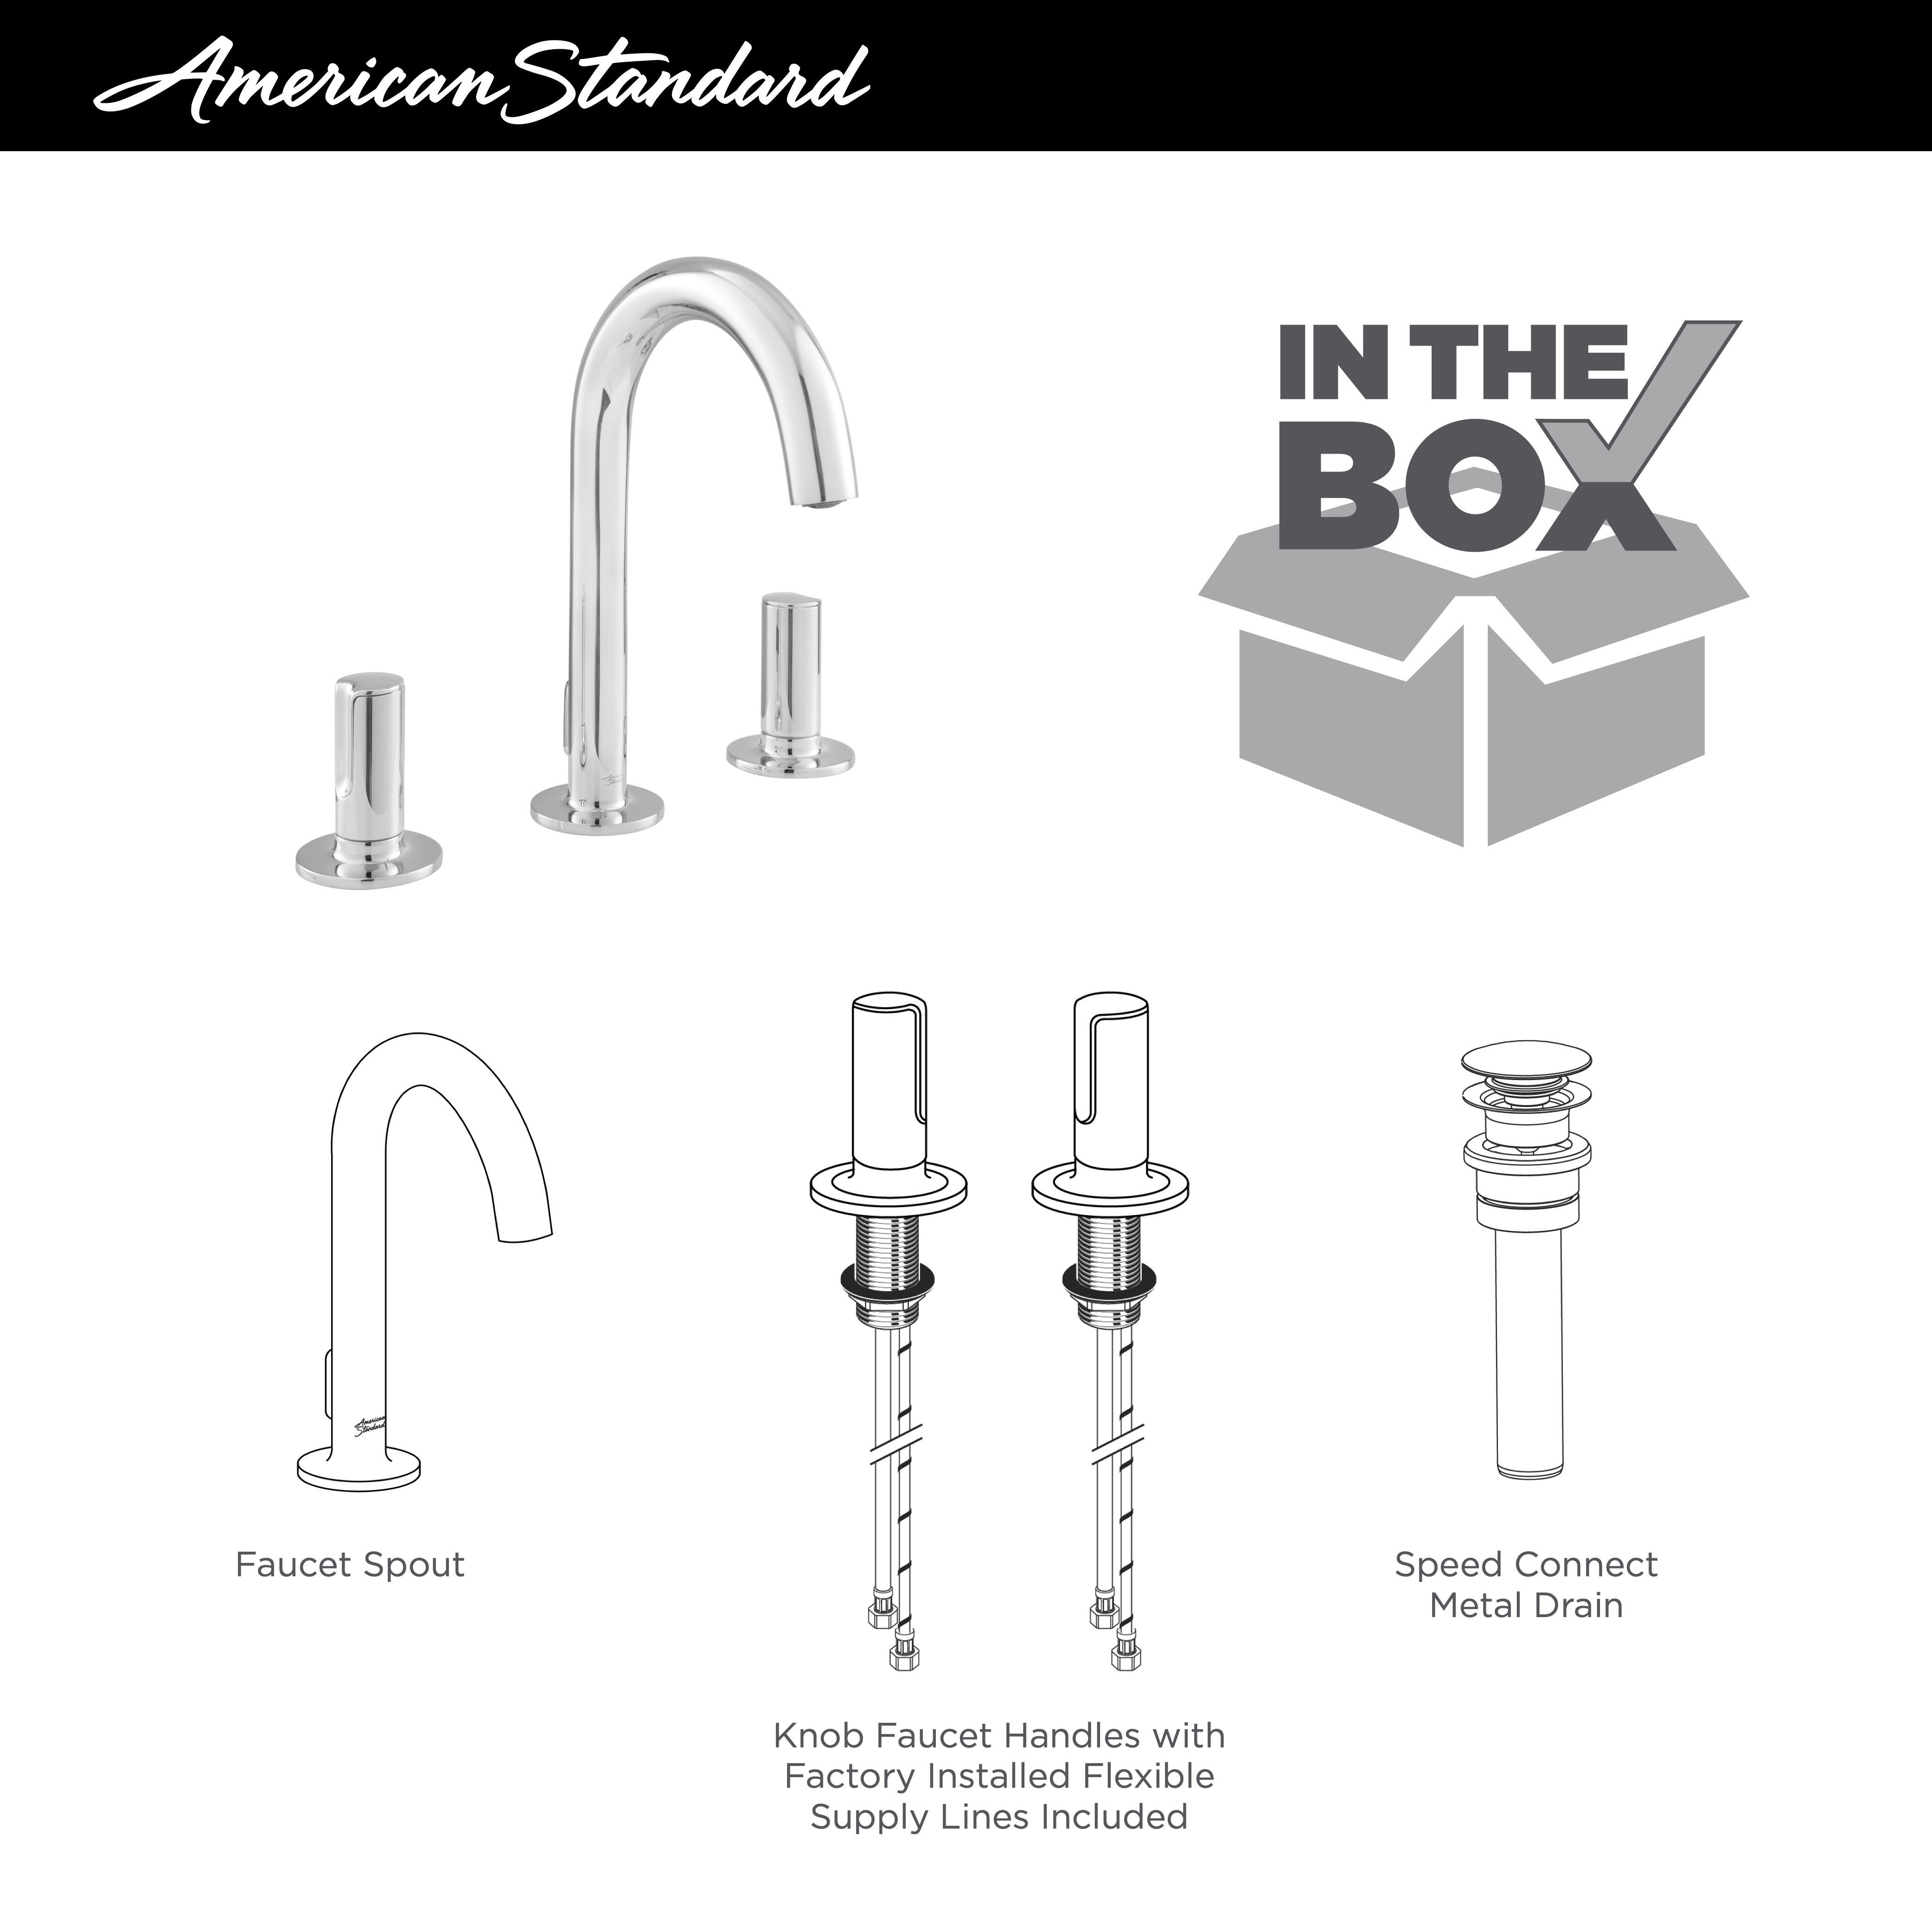 Studio™ S 8-Inch Widespread 2-Handle Bathroom Faucet 1.2 gpm/4.5 L/min With Lever Handles